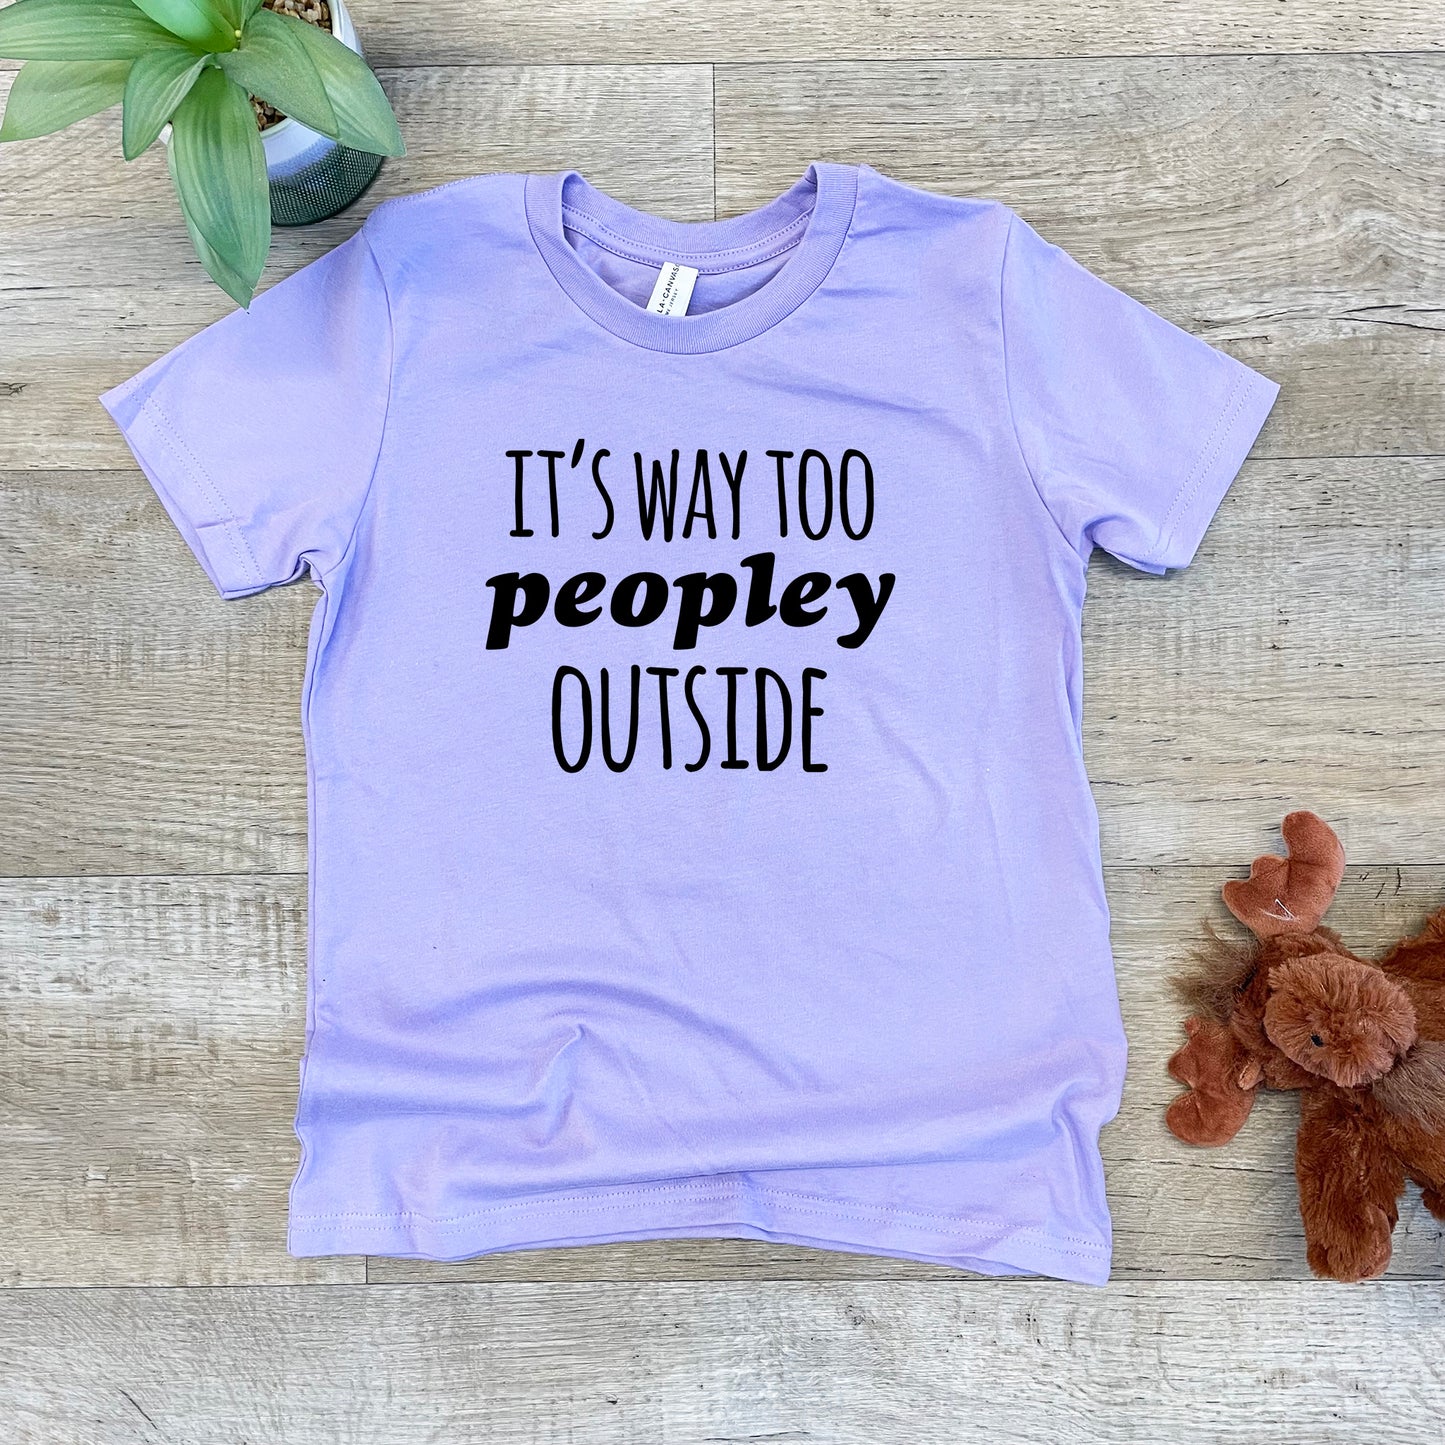 It's Way Too Peopley Outside - Kid's Tee - Columbia Blue or Lavender